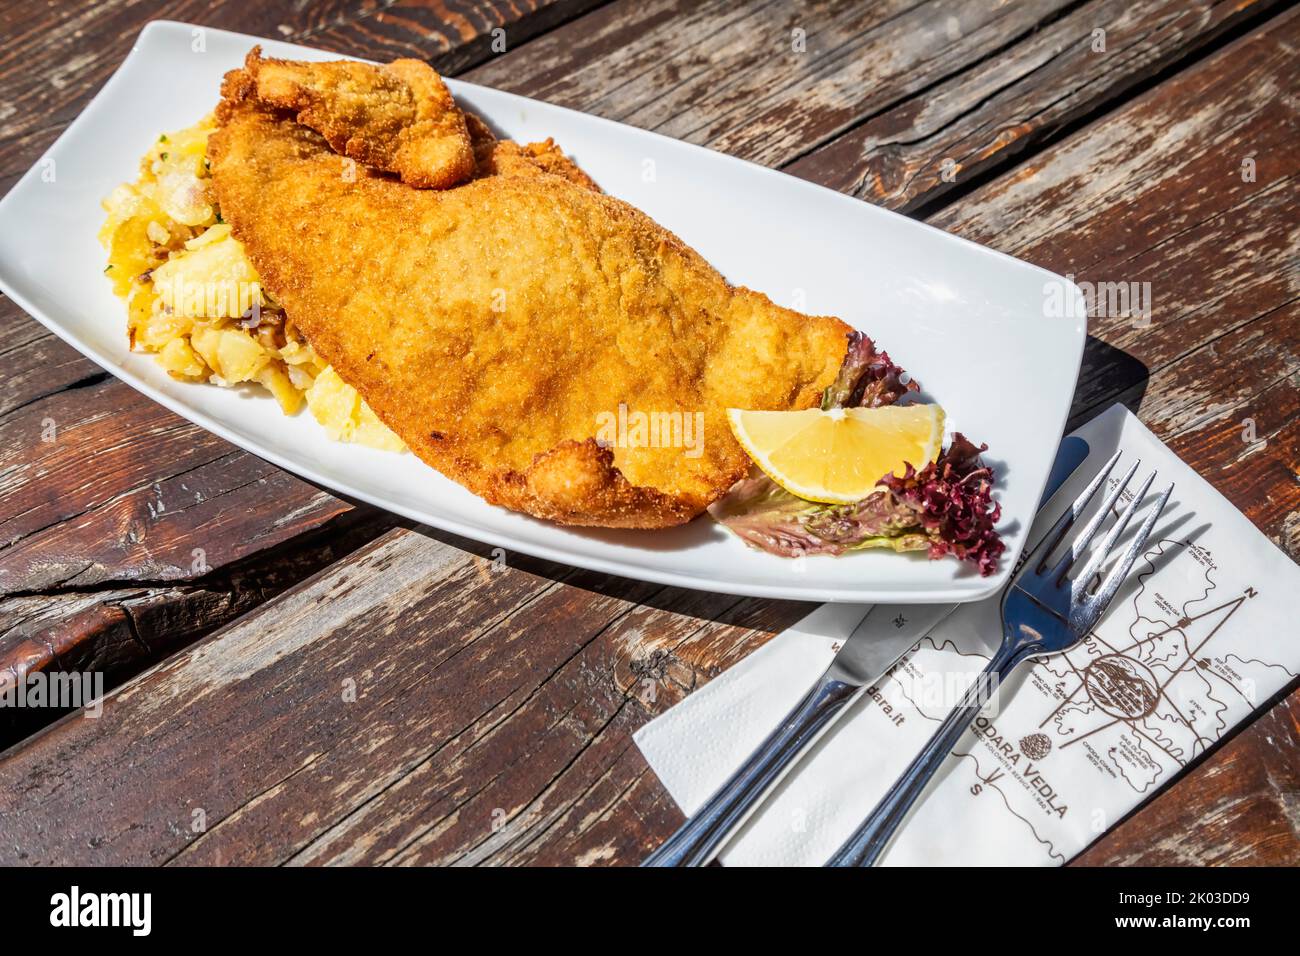 Ready-to-eat Wienerschnitzel with sauteed potato and garnish on white plate and rustic wooden table background Stock Photo